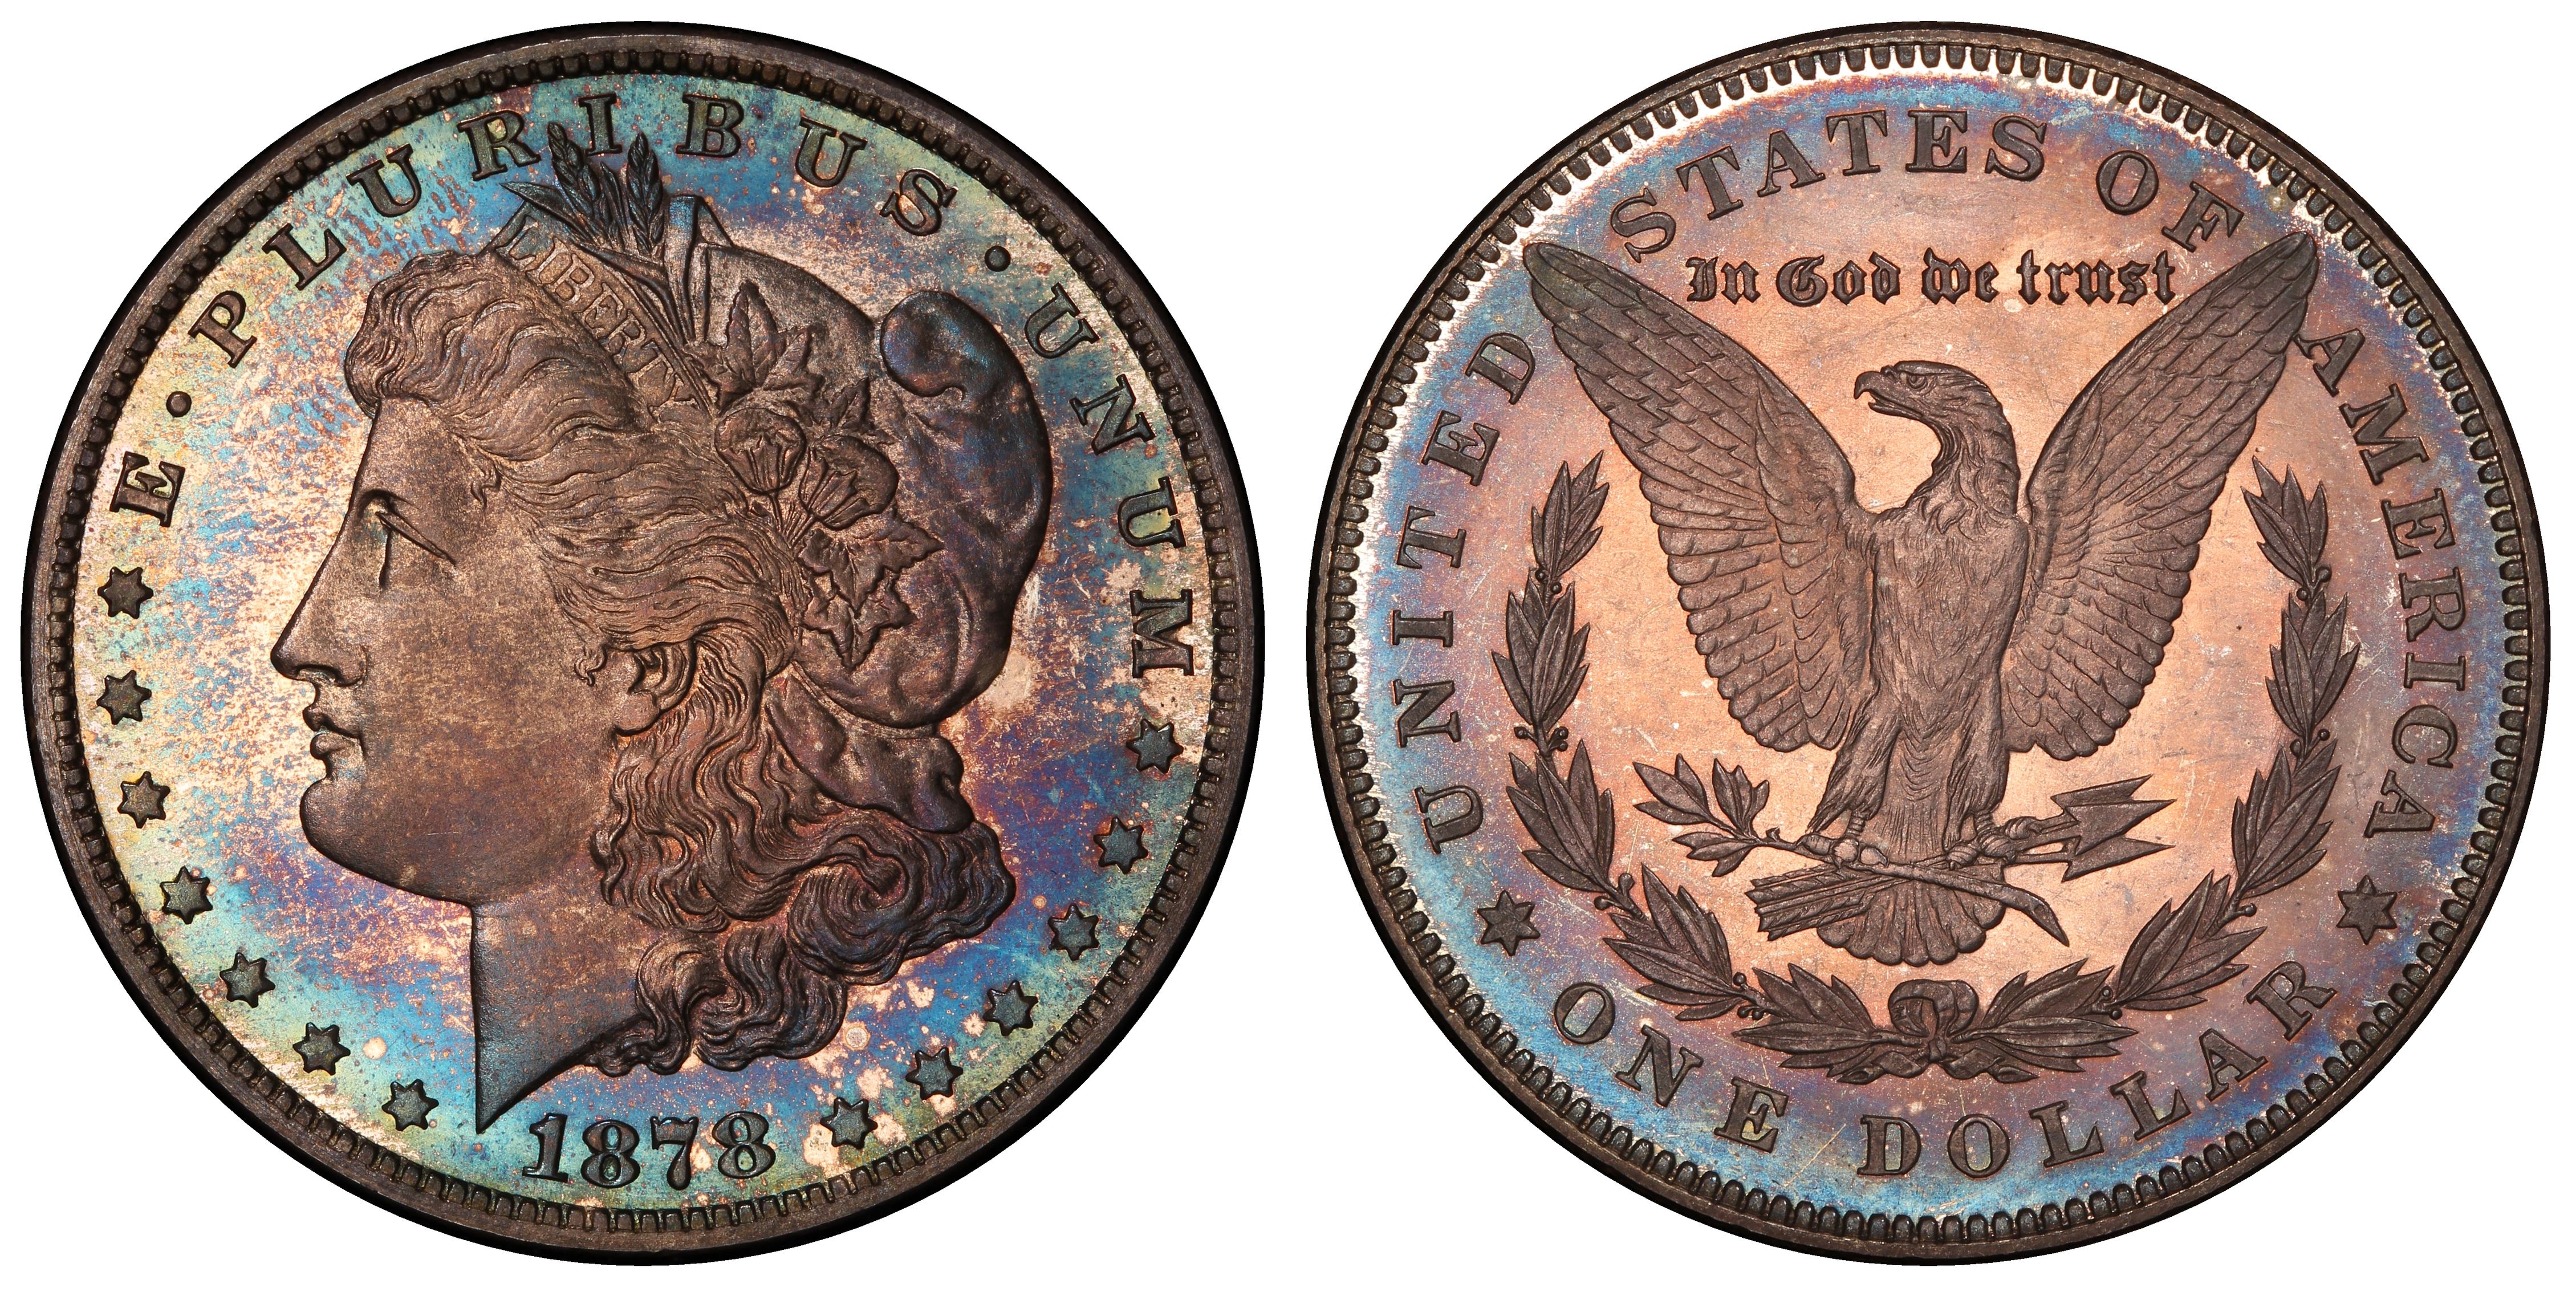 1878 7TF $1 Reverse of 1878 (Proof) Morgan Dollar - PCGS CoinFacts